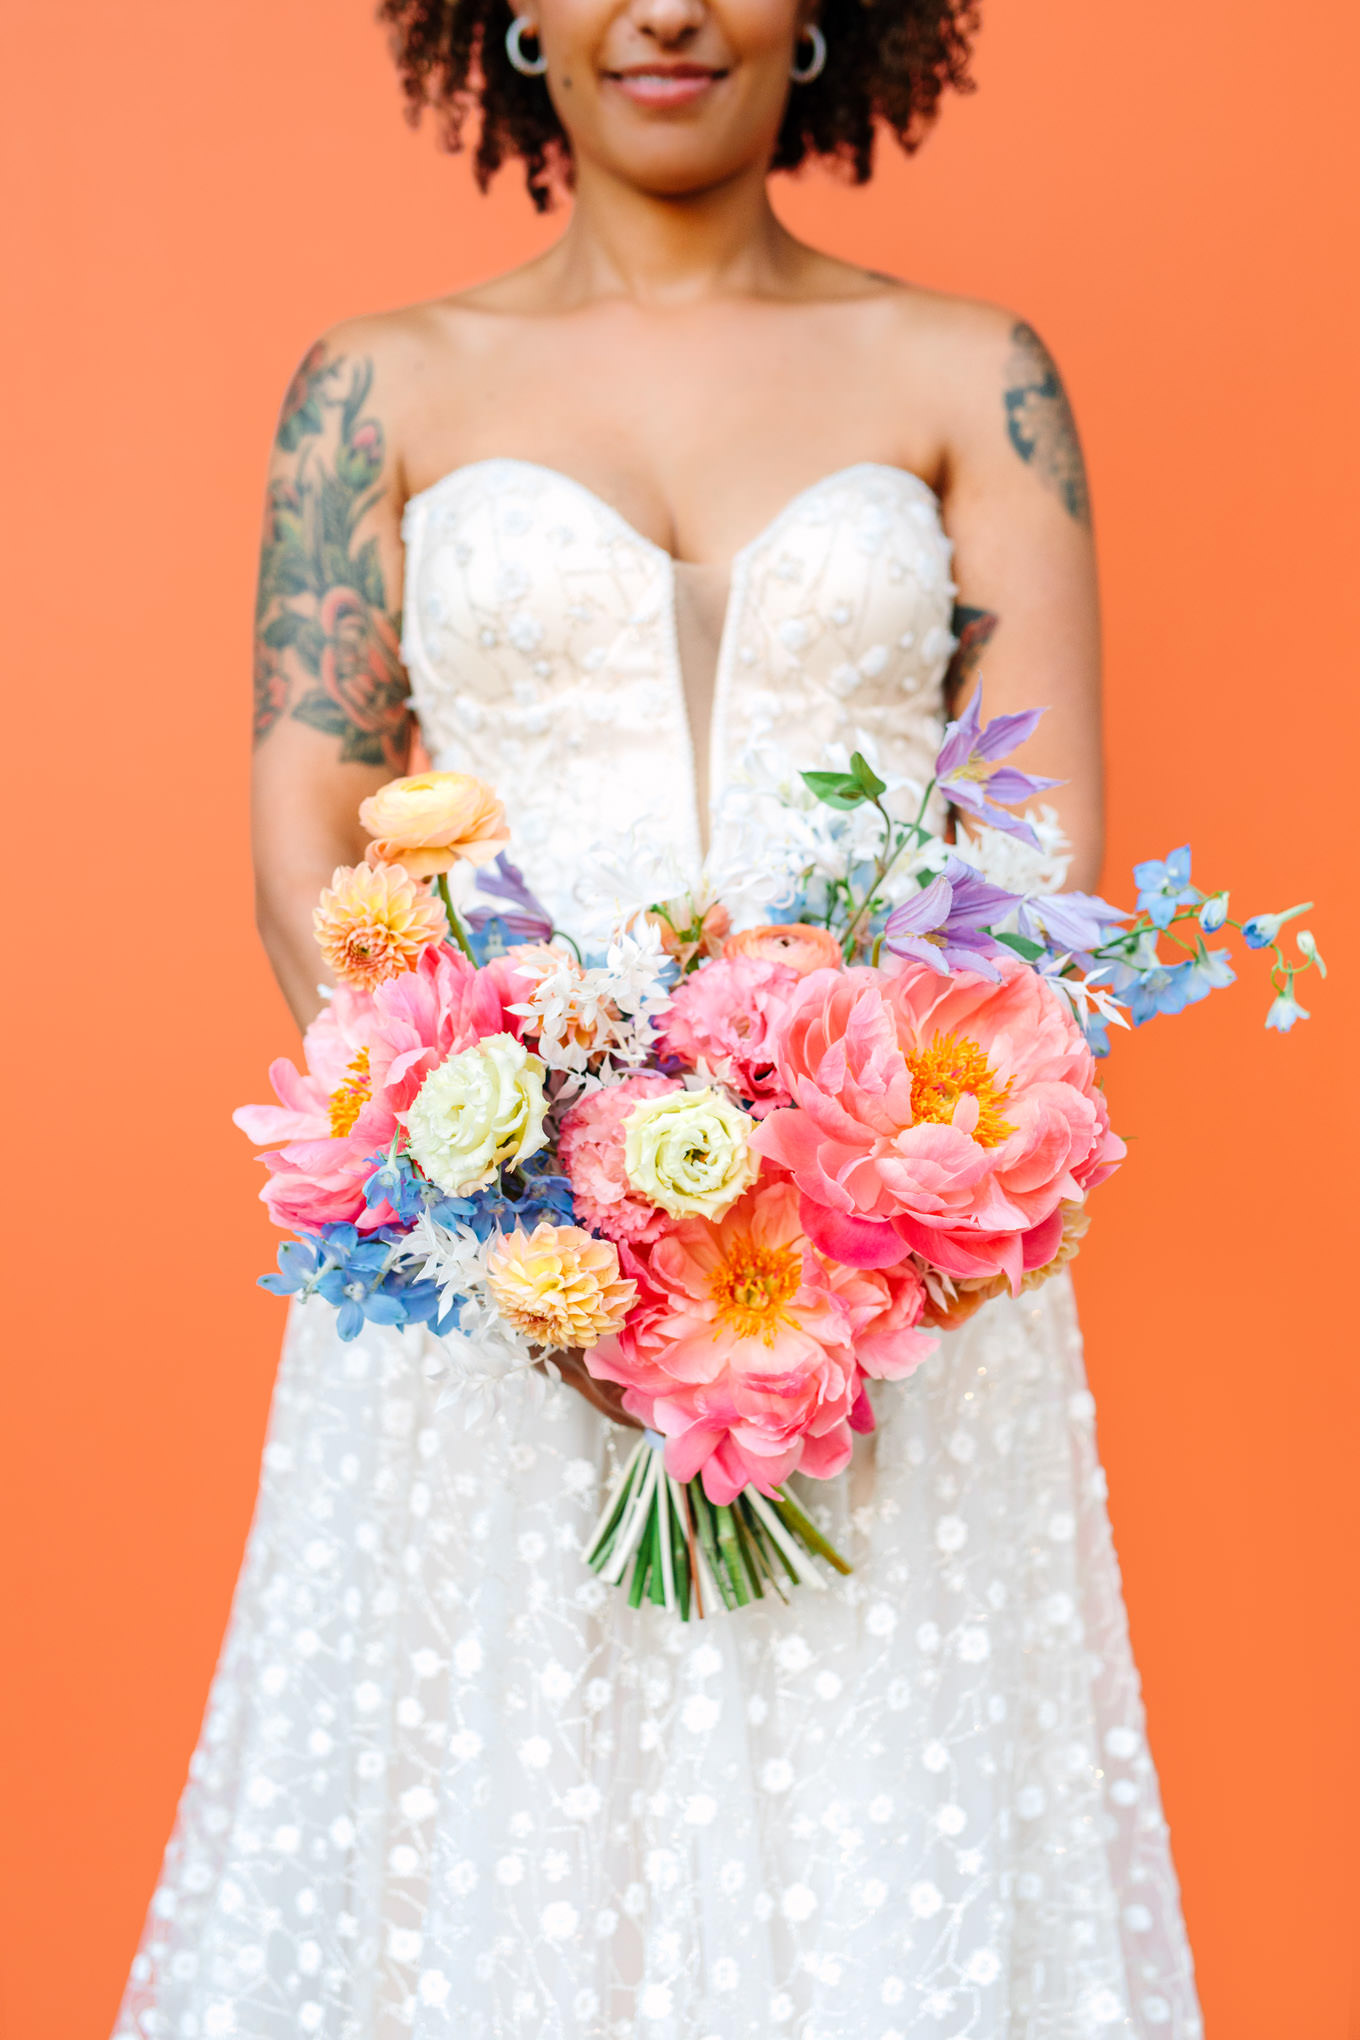 Colorful peony bouquet at The Ruby Street wedding Los Angeles Chinatown engagement session | Engagement, elopement, and wedding photography roundup of Mary Costa’s favorite images from 2020 | Colorful and elevated photography for fun-loving couples in Southern California | #2020wedding #elopement #weddingphoto #weddingphotography #microwedding   Source: Mary Costa Photography | Los Angeles